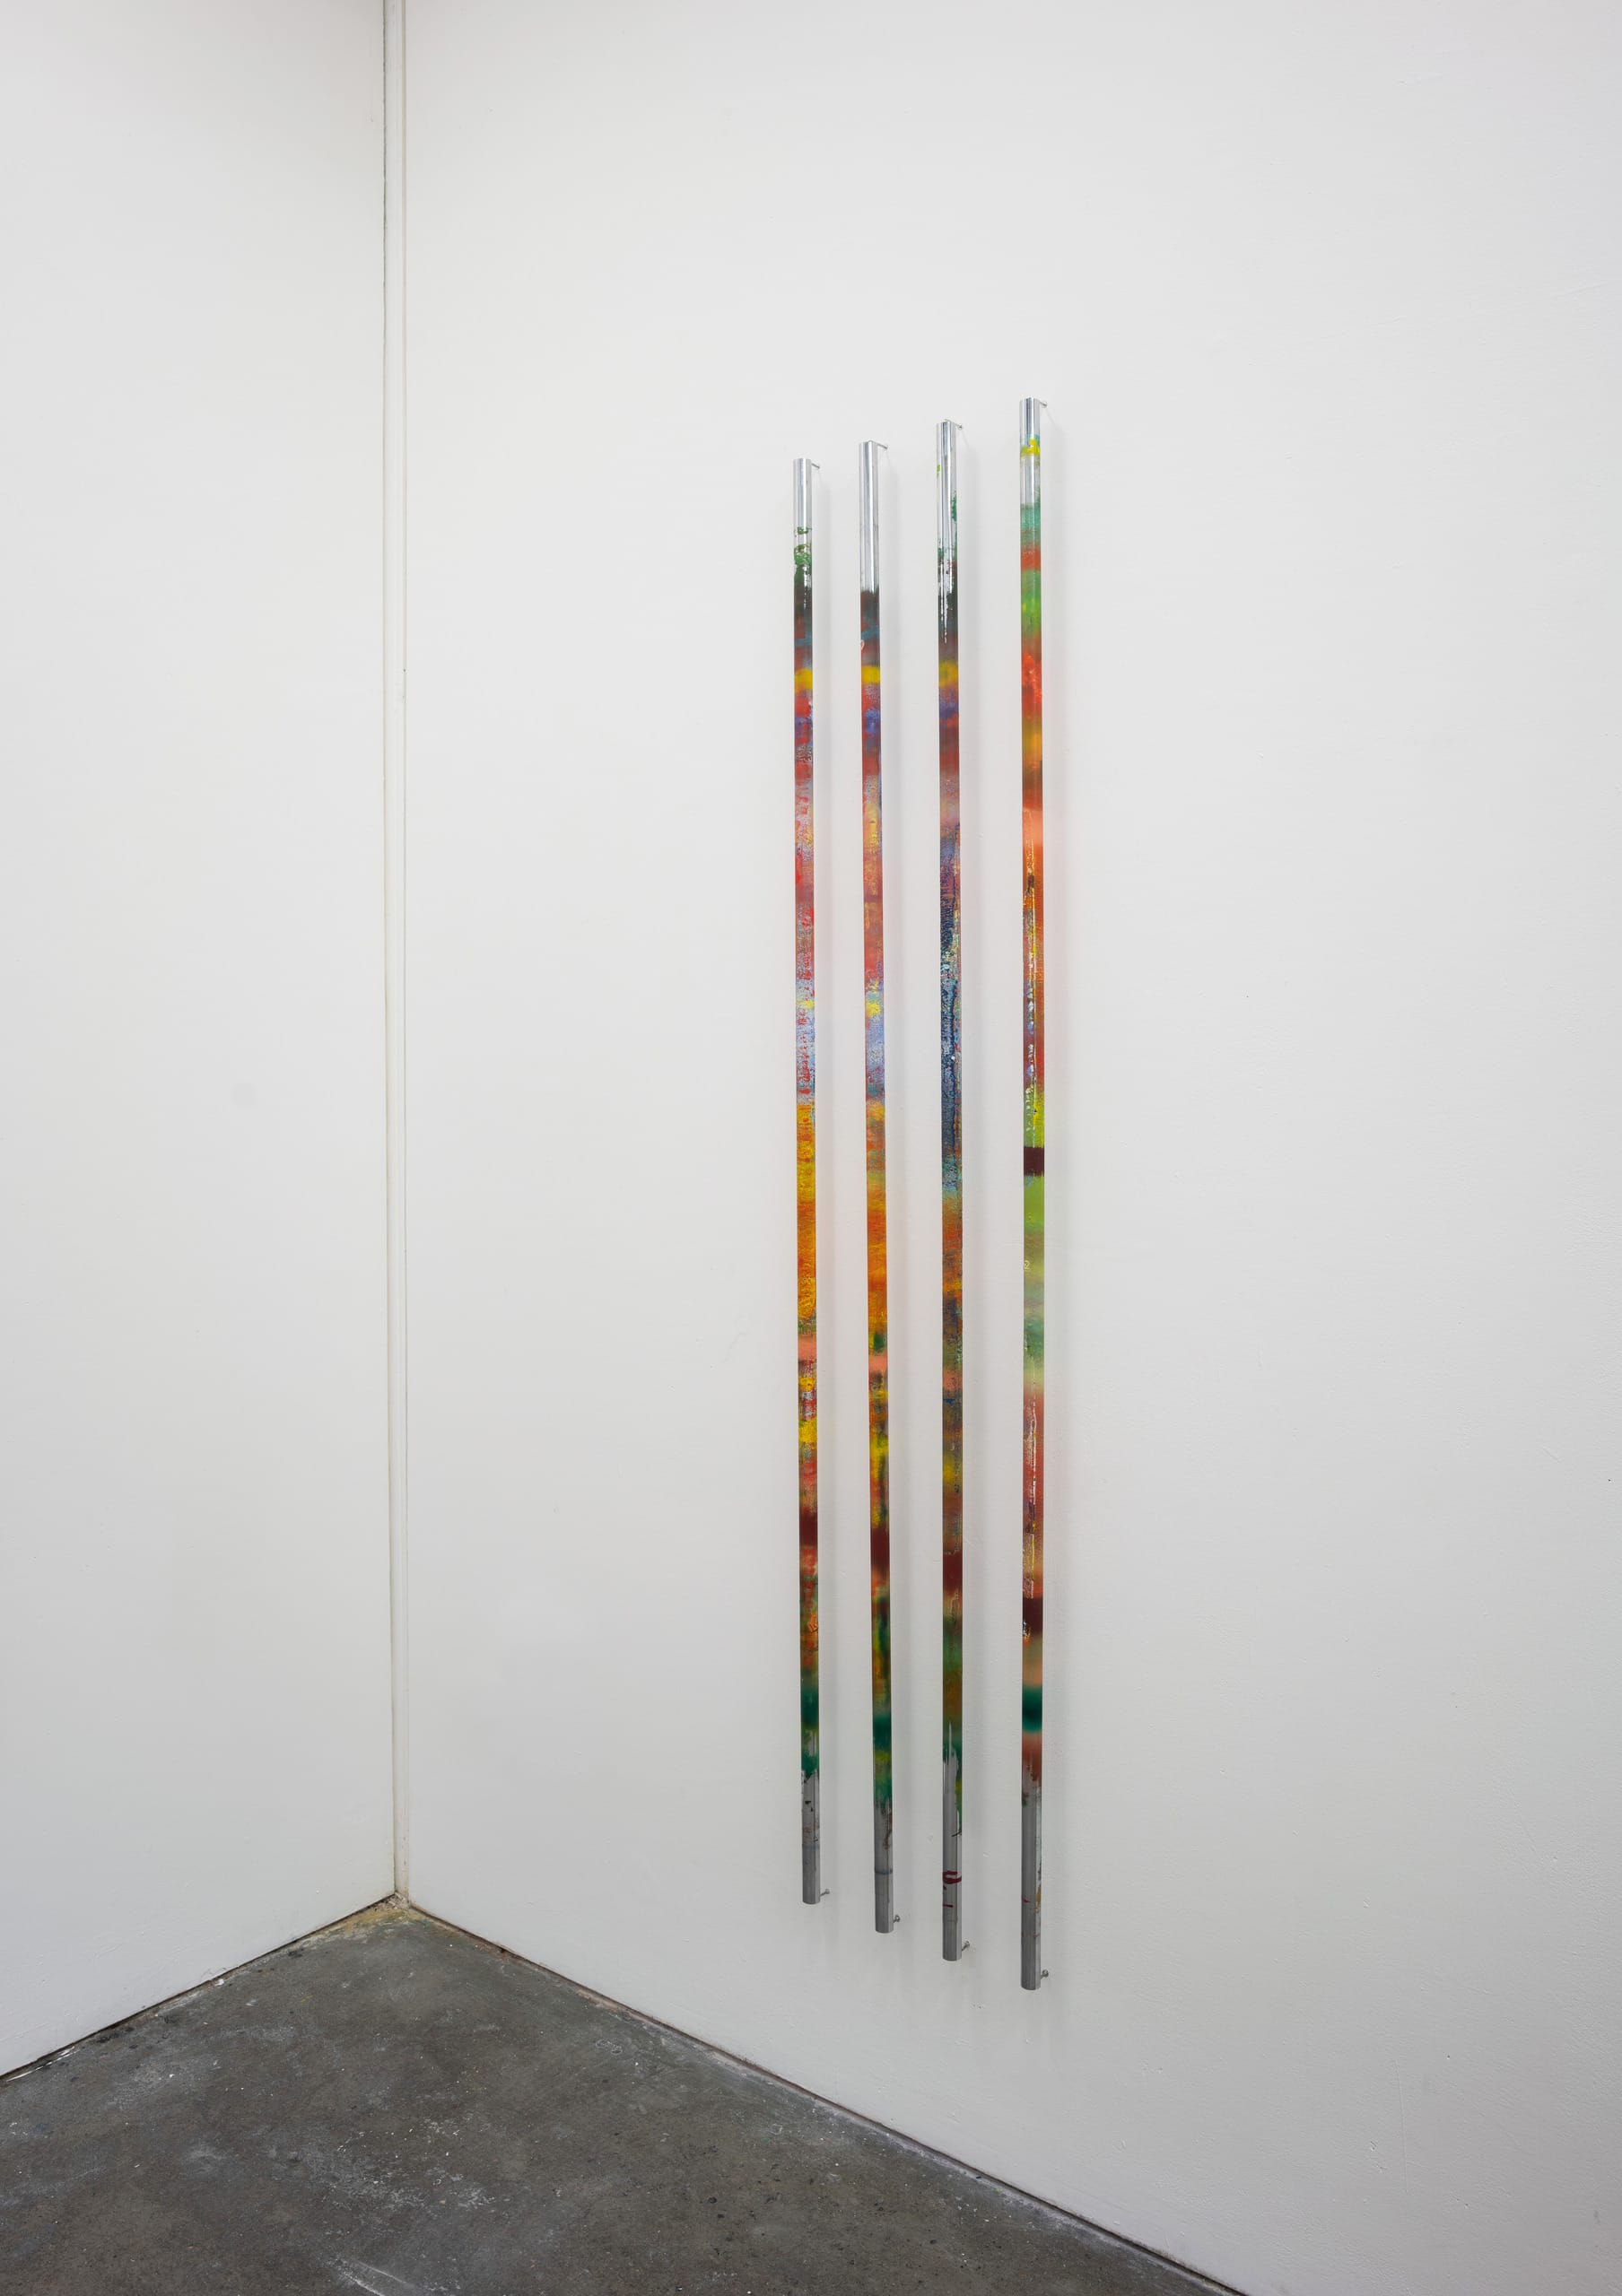 install of Artefacts of Stochastic 1, 2 and 3. oil paint on chrome bars